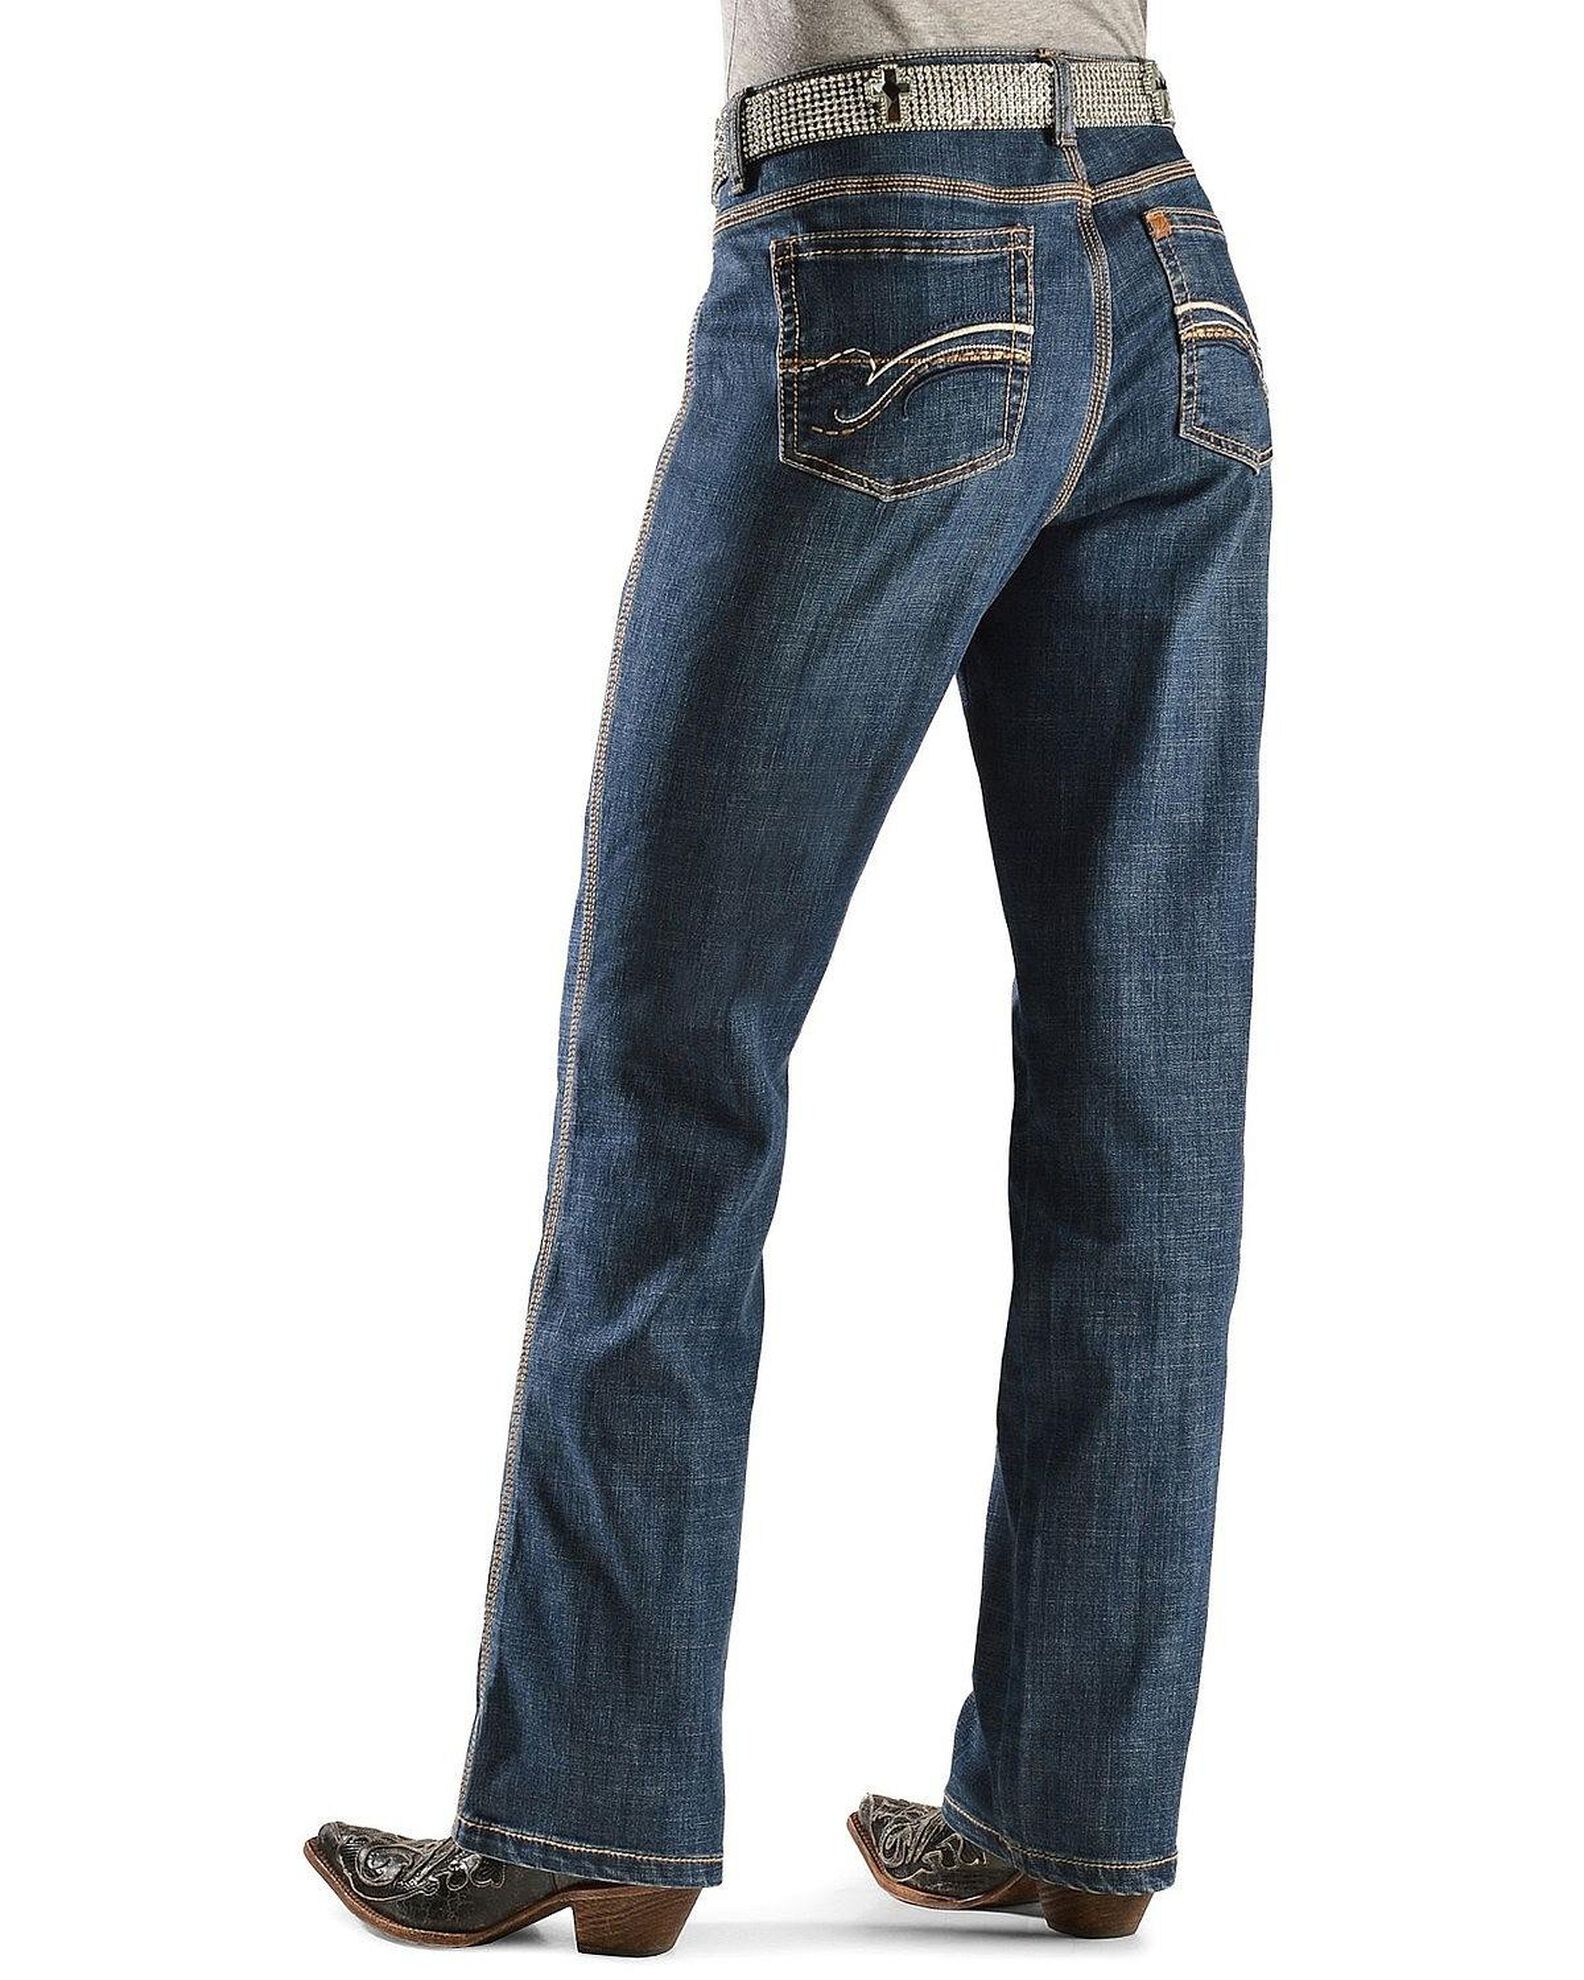 Wrangler Women's Aura Instantly Slimming Jeans - Country Outfitter